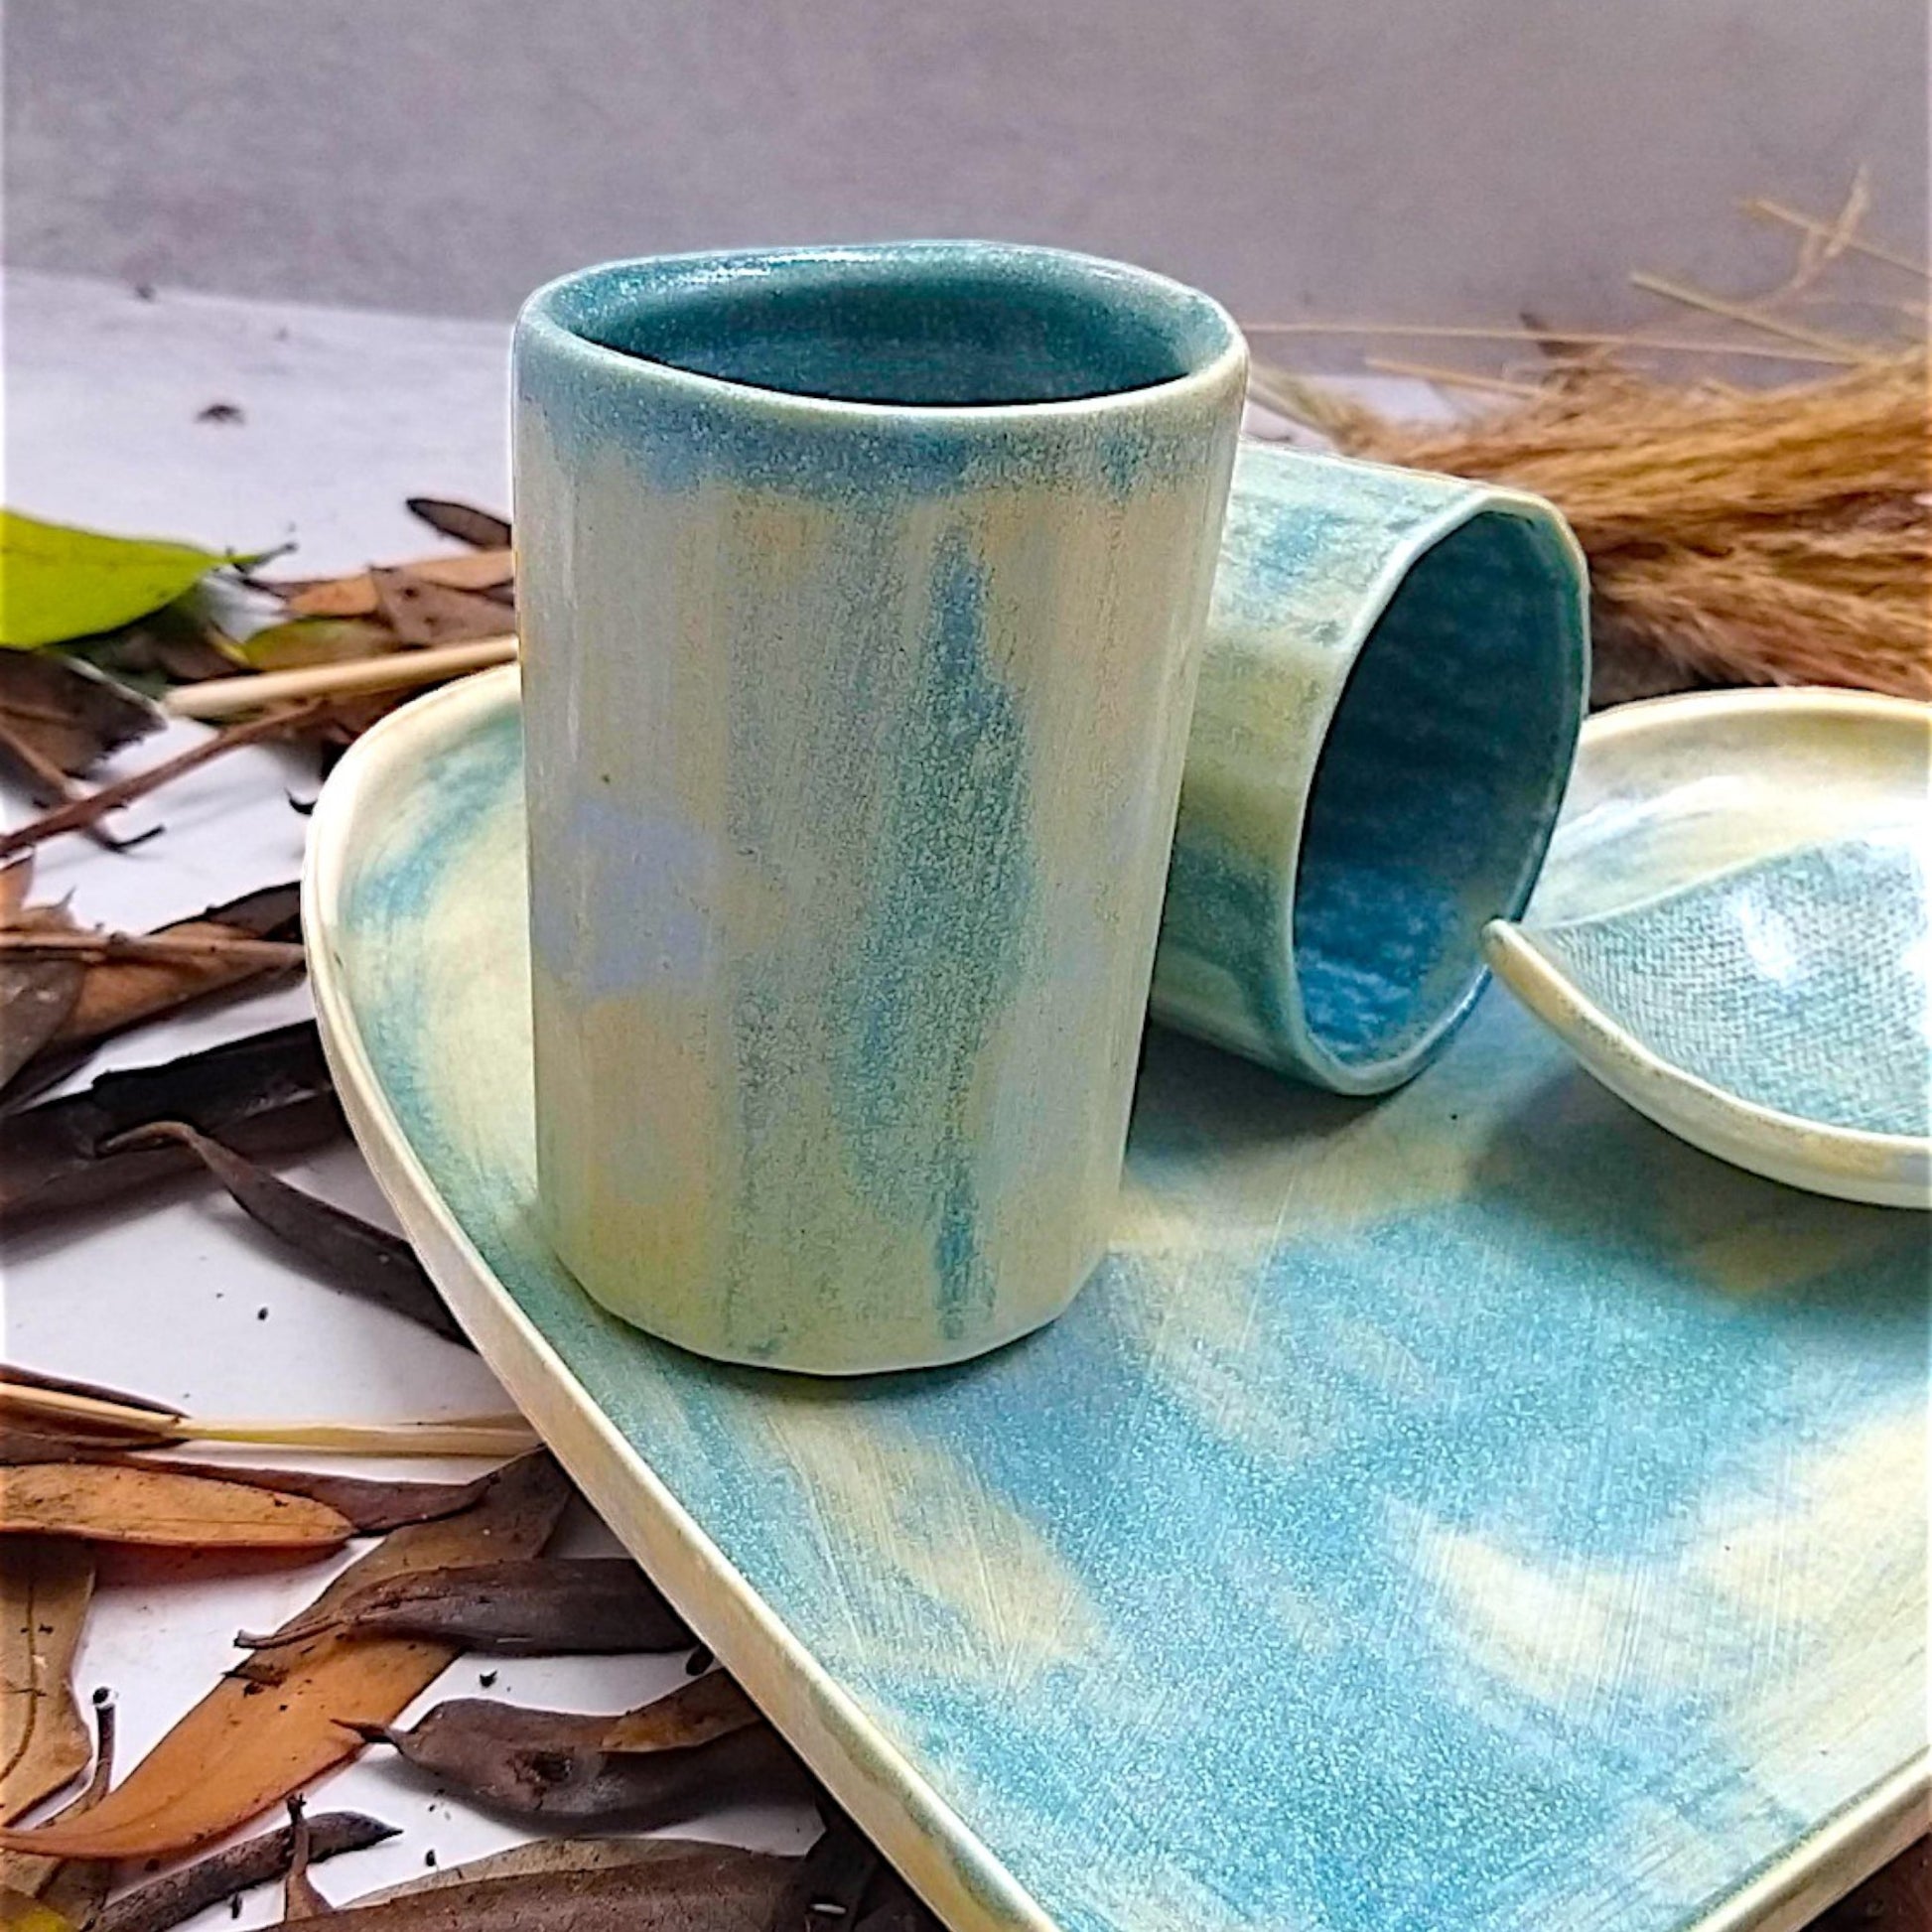 Bluish yellow handcrafted ceramic heart-themed plate, cups and bowl